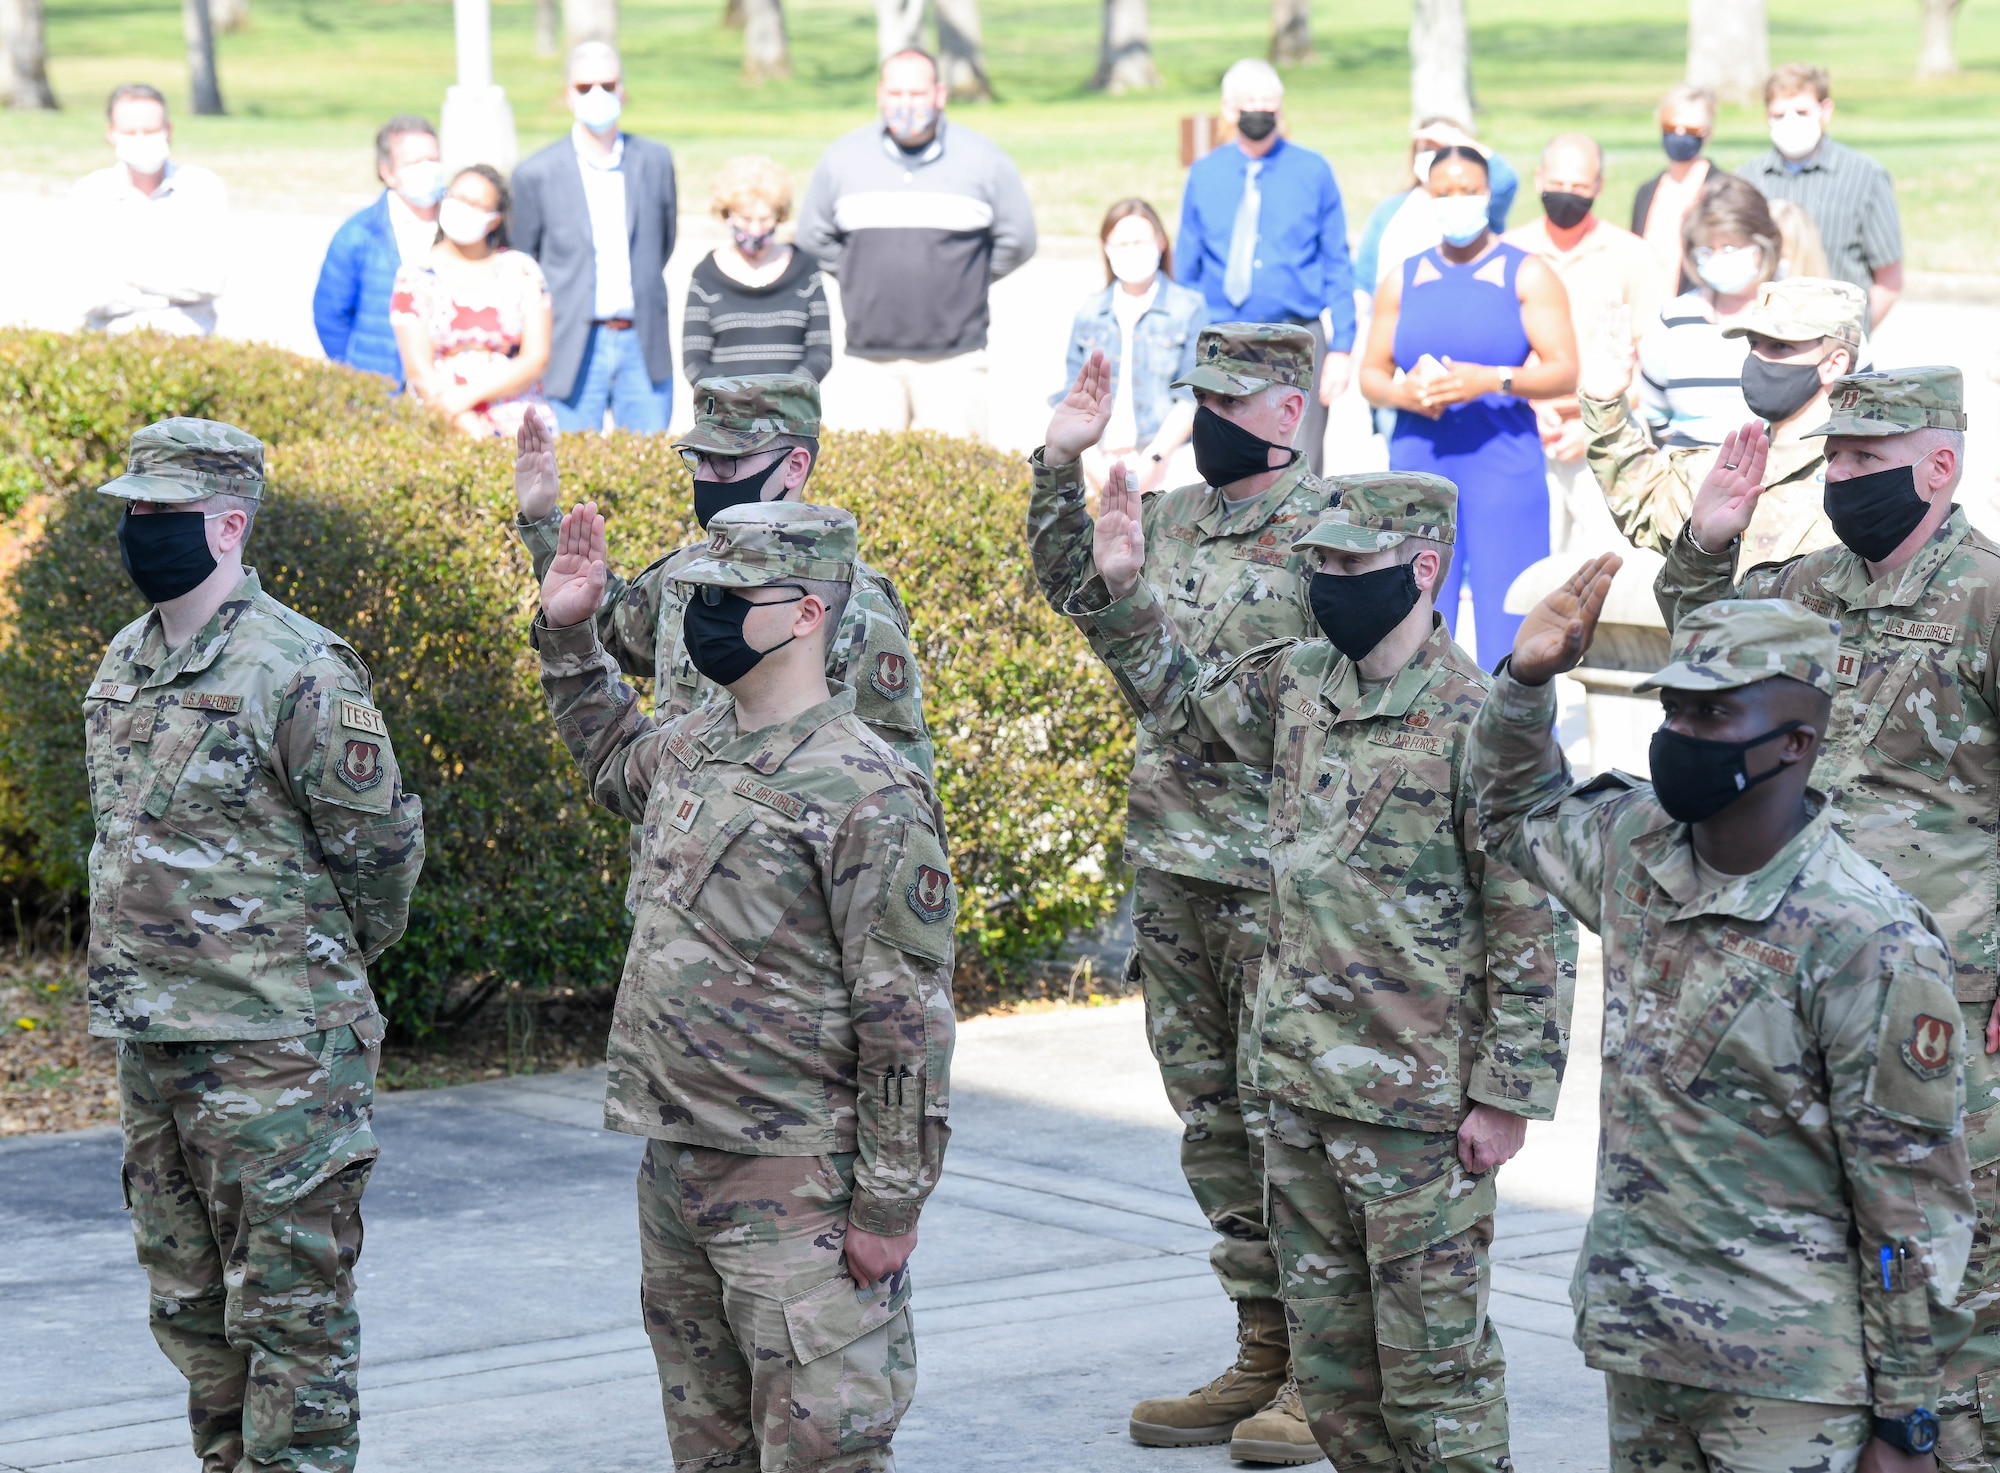 Air Force officers reaffirm their oath of office during a flag retreat ceremony to mark the completion of the Extremism Stand Down exercises, April 6, 2021, at Arnold Air Force Base, Tenn. The importance of the oath of office was a focus of the stand down. (U.S. Air Force photo by Jill Pickett)